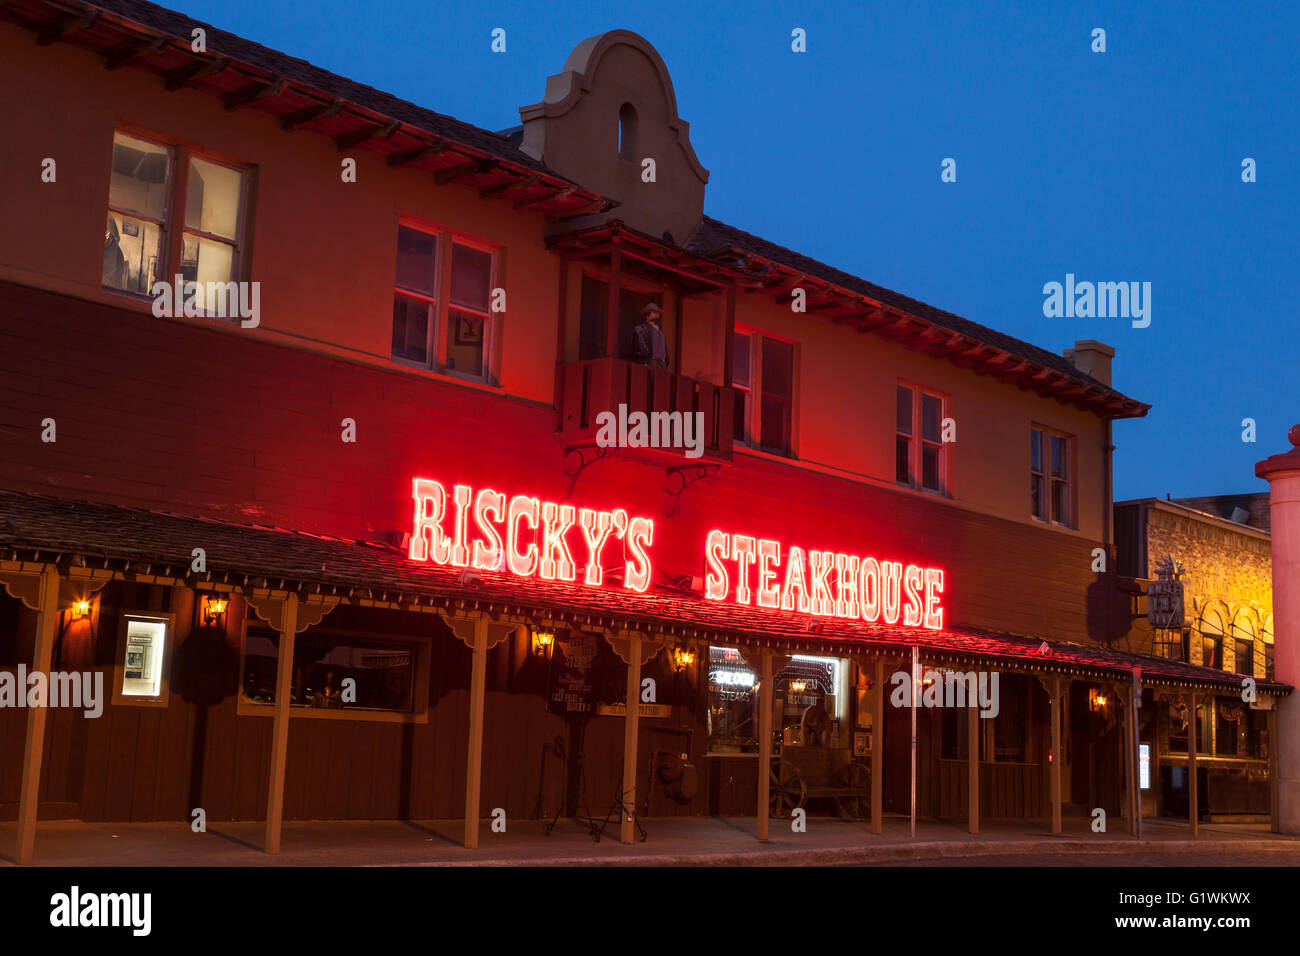 Riscky's Steakhouse in the Fort Worth Stockyards historical district